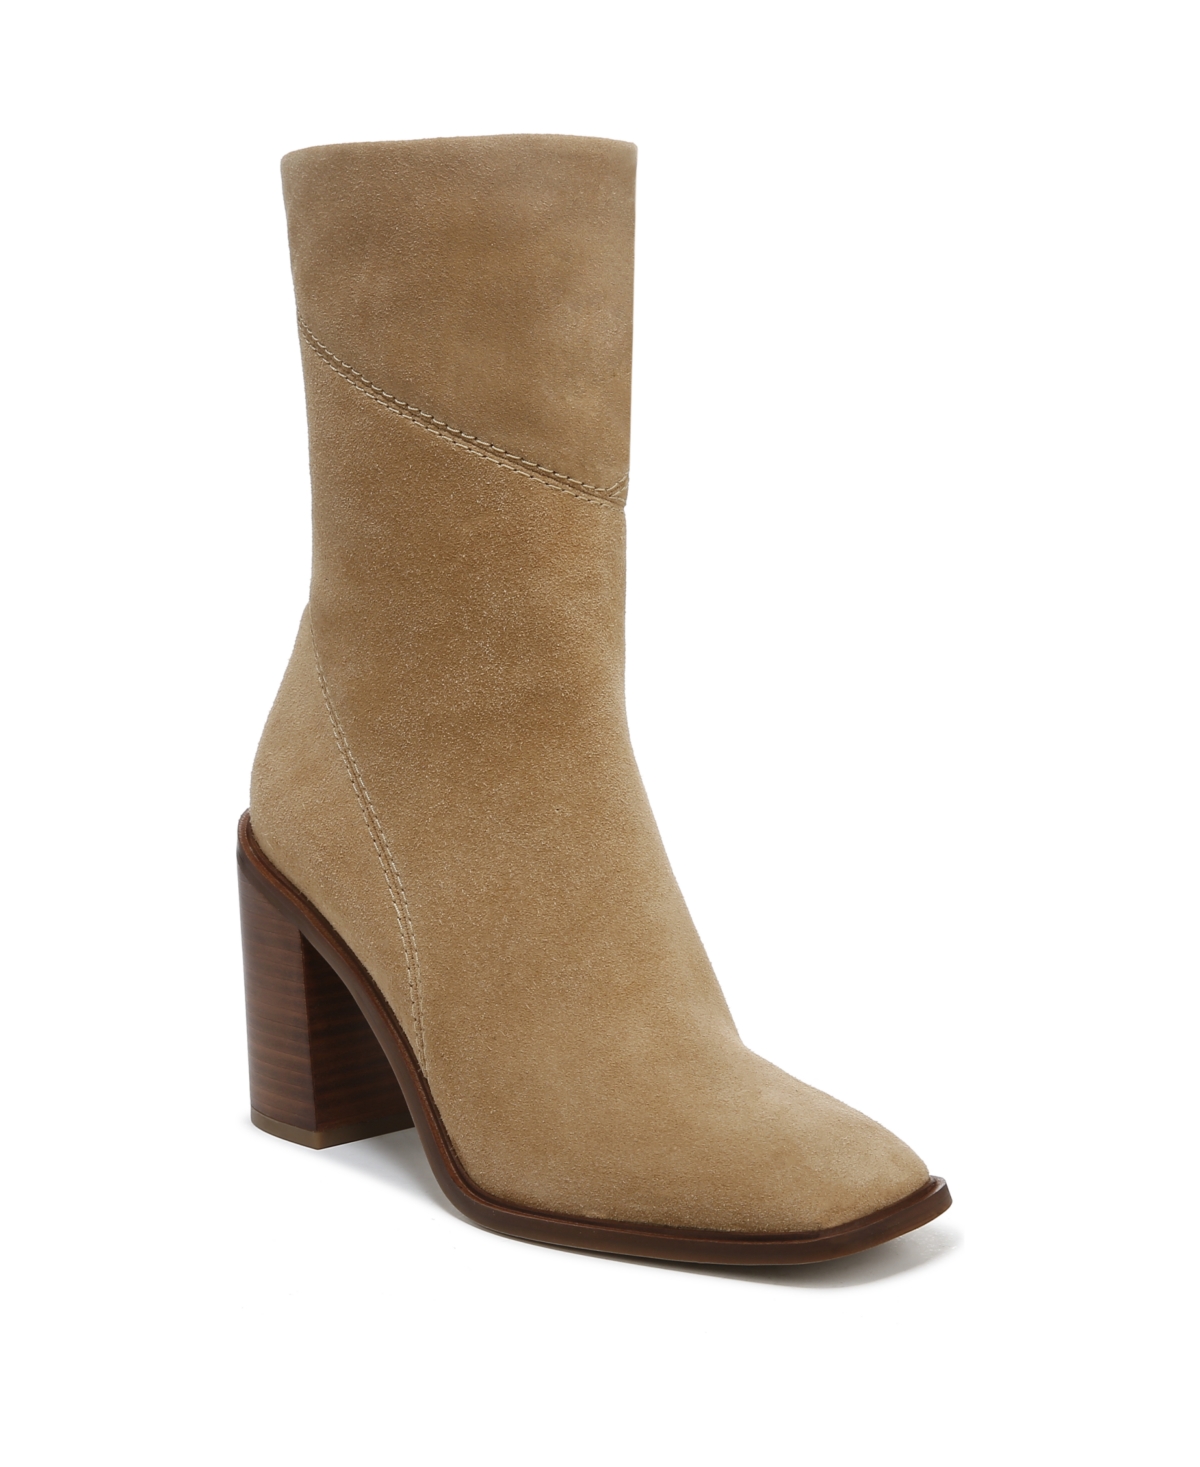 Stevie Mid Shaft Boots - Cookie Tan Suede